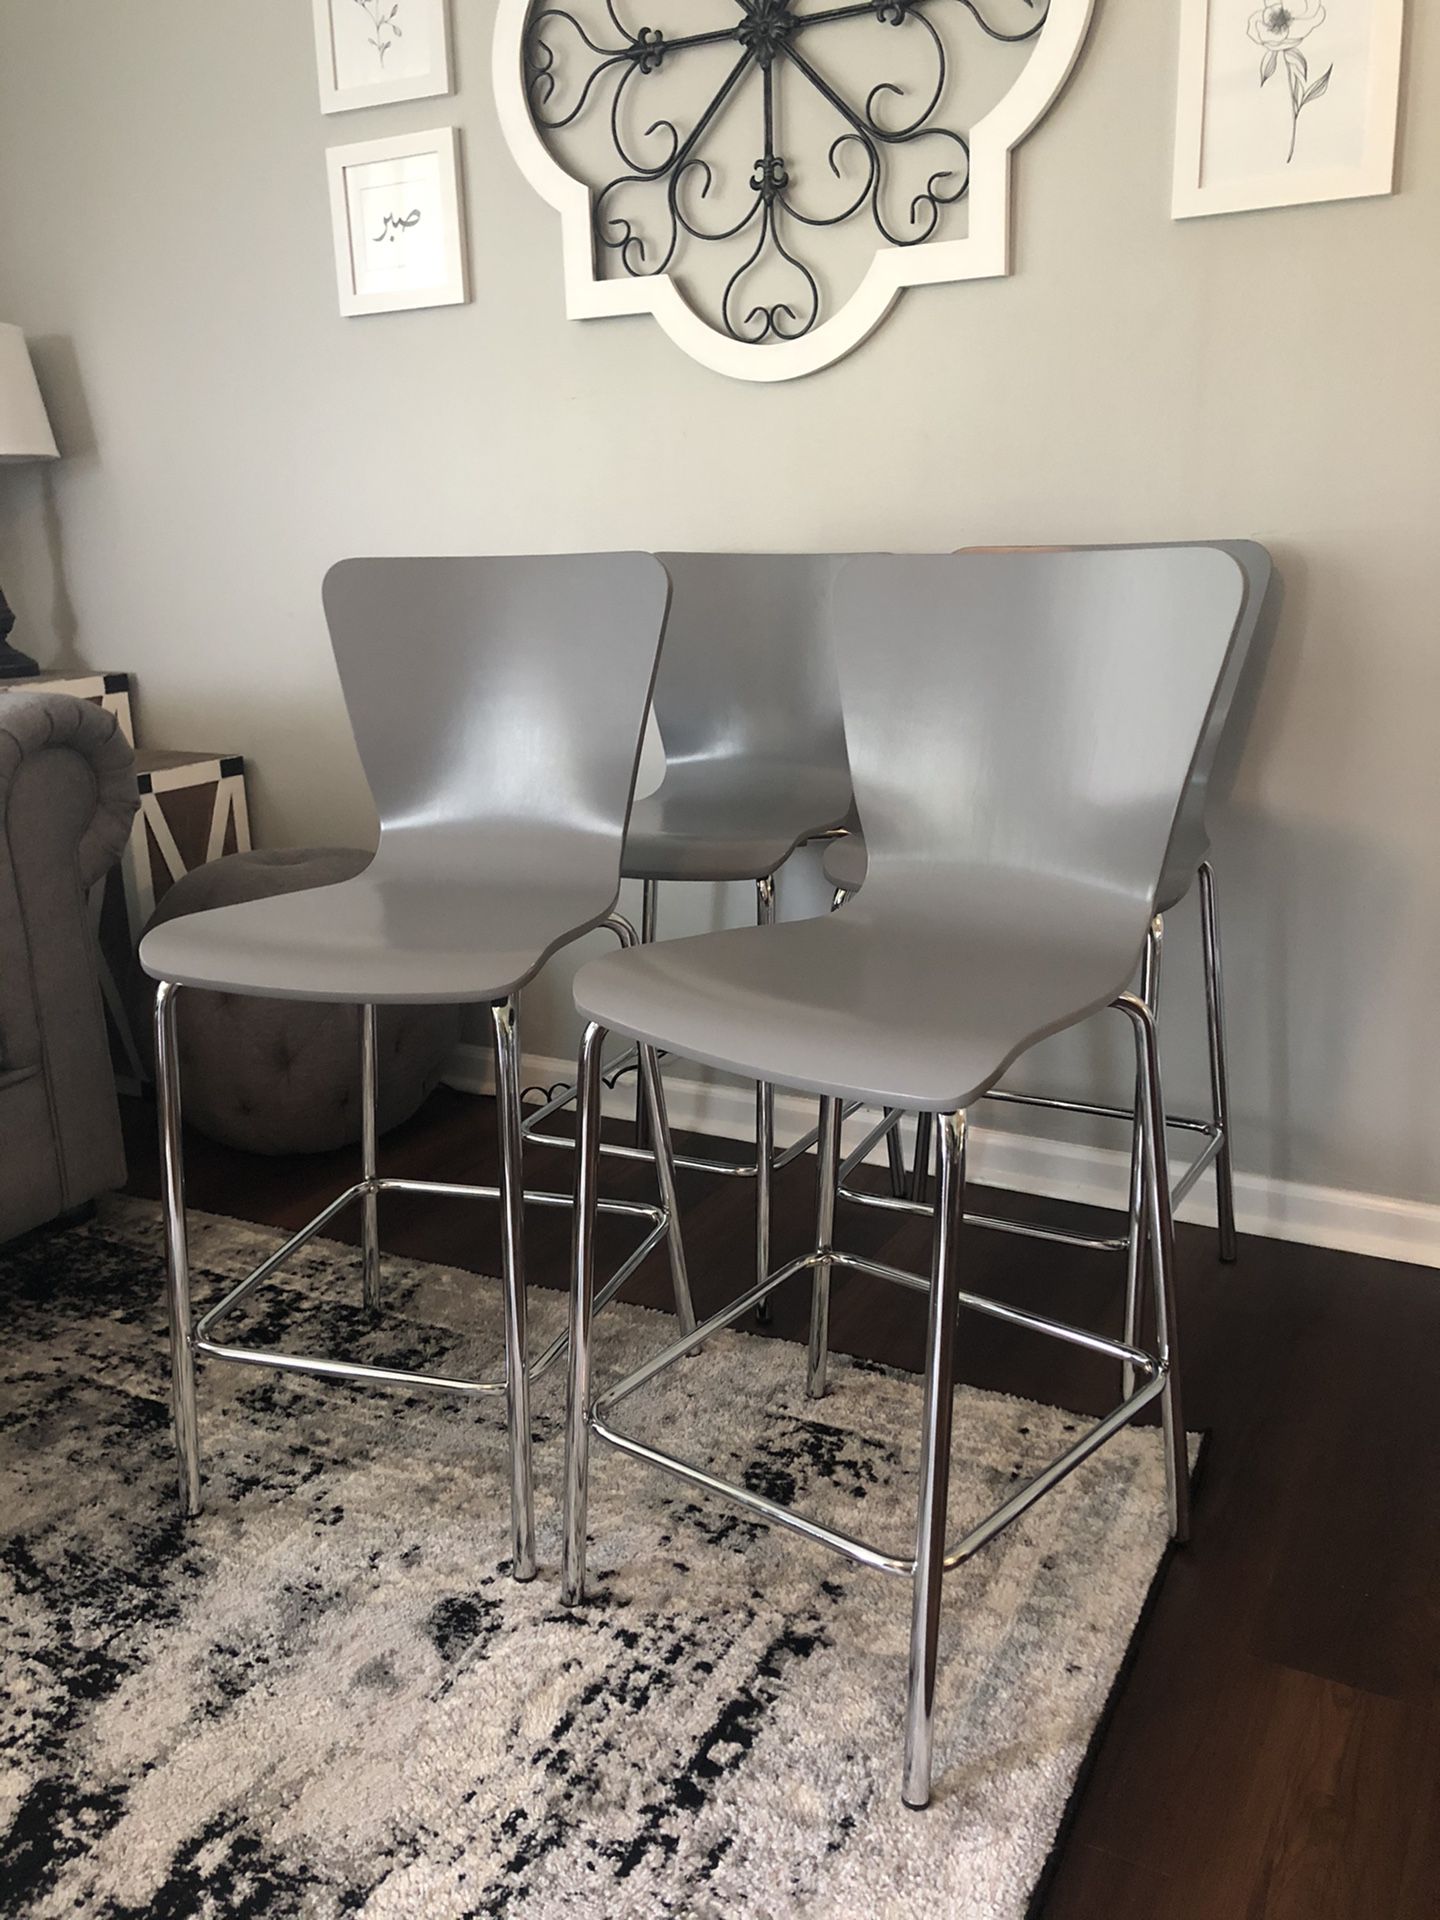 BRAND NEW! - 4 Grey Barstools - 24” Seat Height - Wood and Metal Modern Dining Chairs Stools